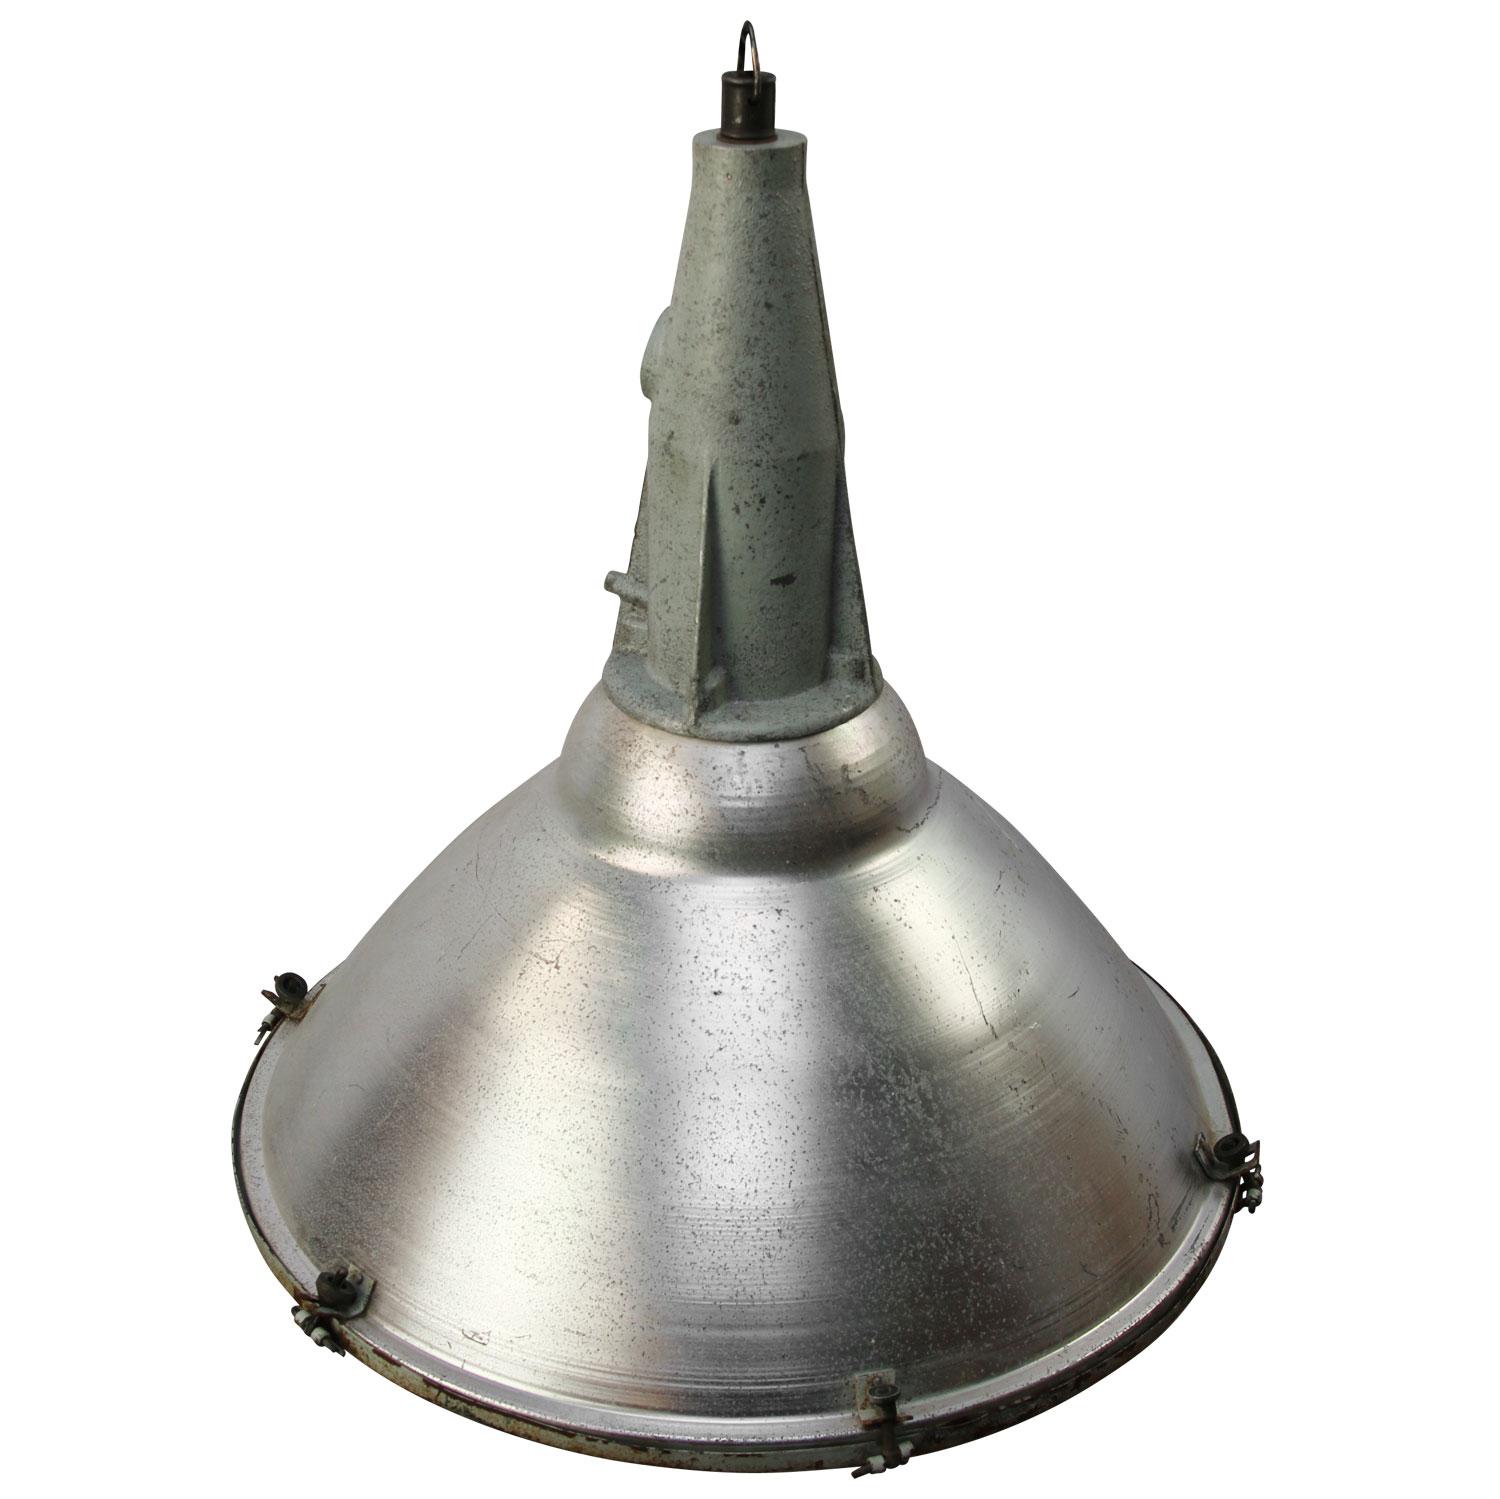 Industrial hanging pendant lamp.
Aluminum shade, cast iron top, clear glass.

Weight: 7.50 kg / 16.5 lb

Priced per individual item. All lamps have been made suitable by international standards for incandescent light bulbs, energy-efficient and LED